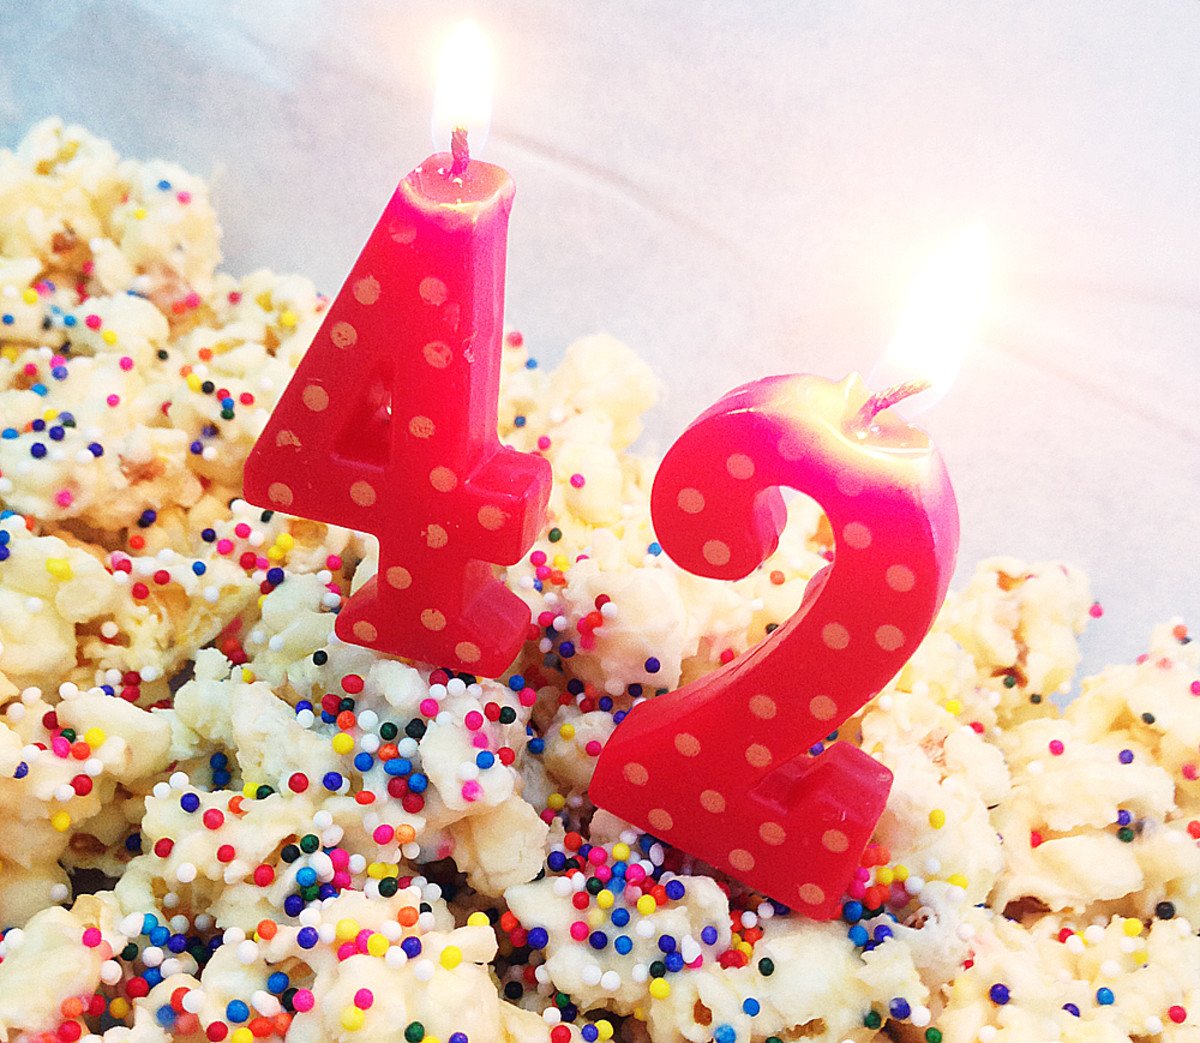 See? You can put candles in birthday-cake popcorn, natch.